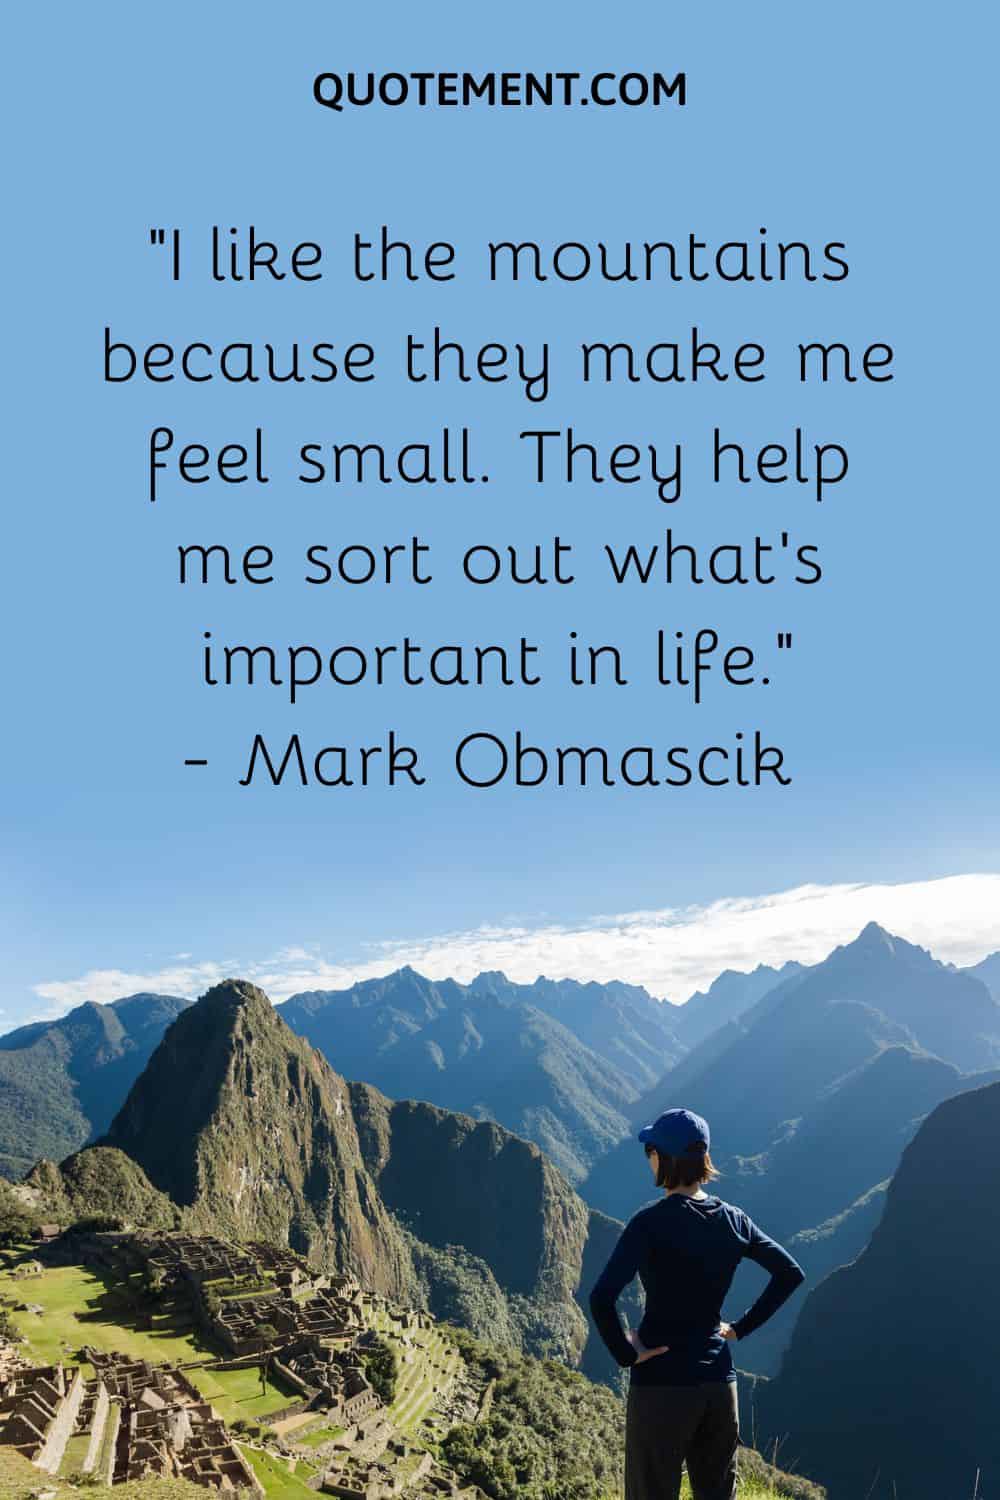 “I like the mountains because they make me feel small. They help me sort out what’s important in life.”― Mark Obmascik